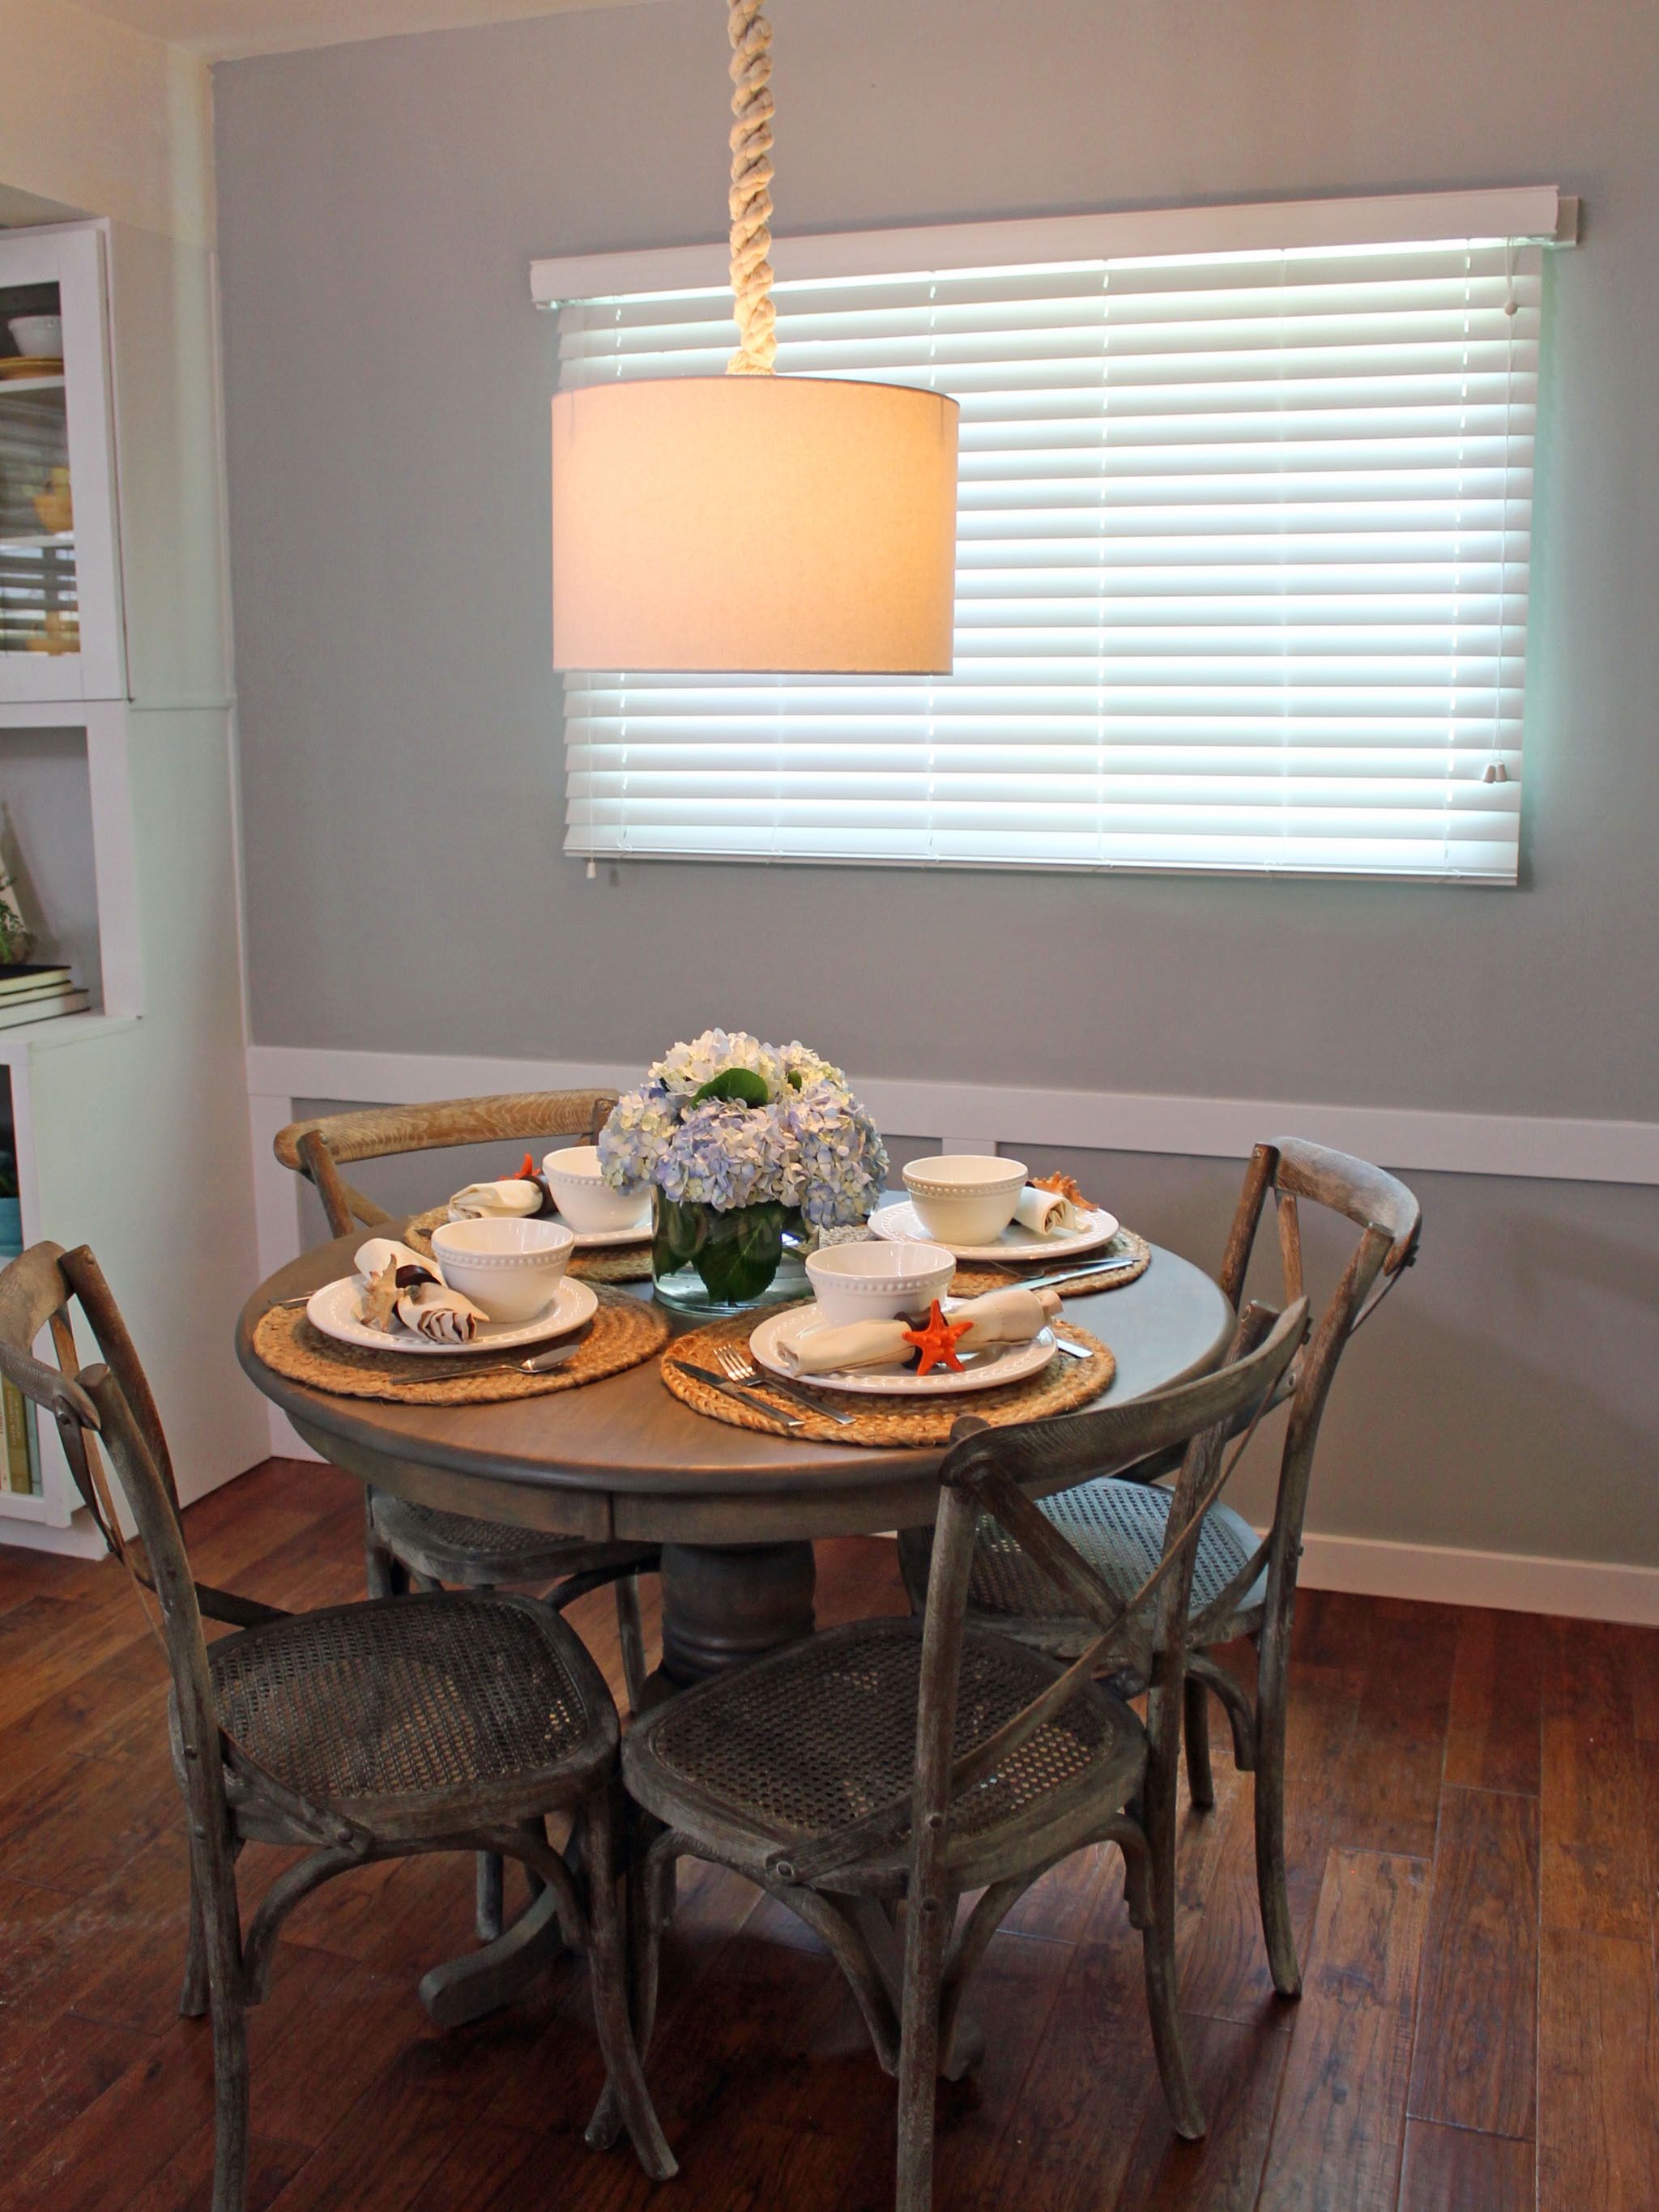 Small Coastal Dining Room With Rustic Table (View 8 of 18)